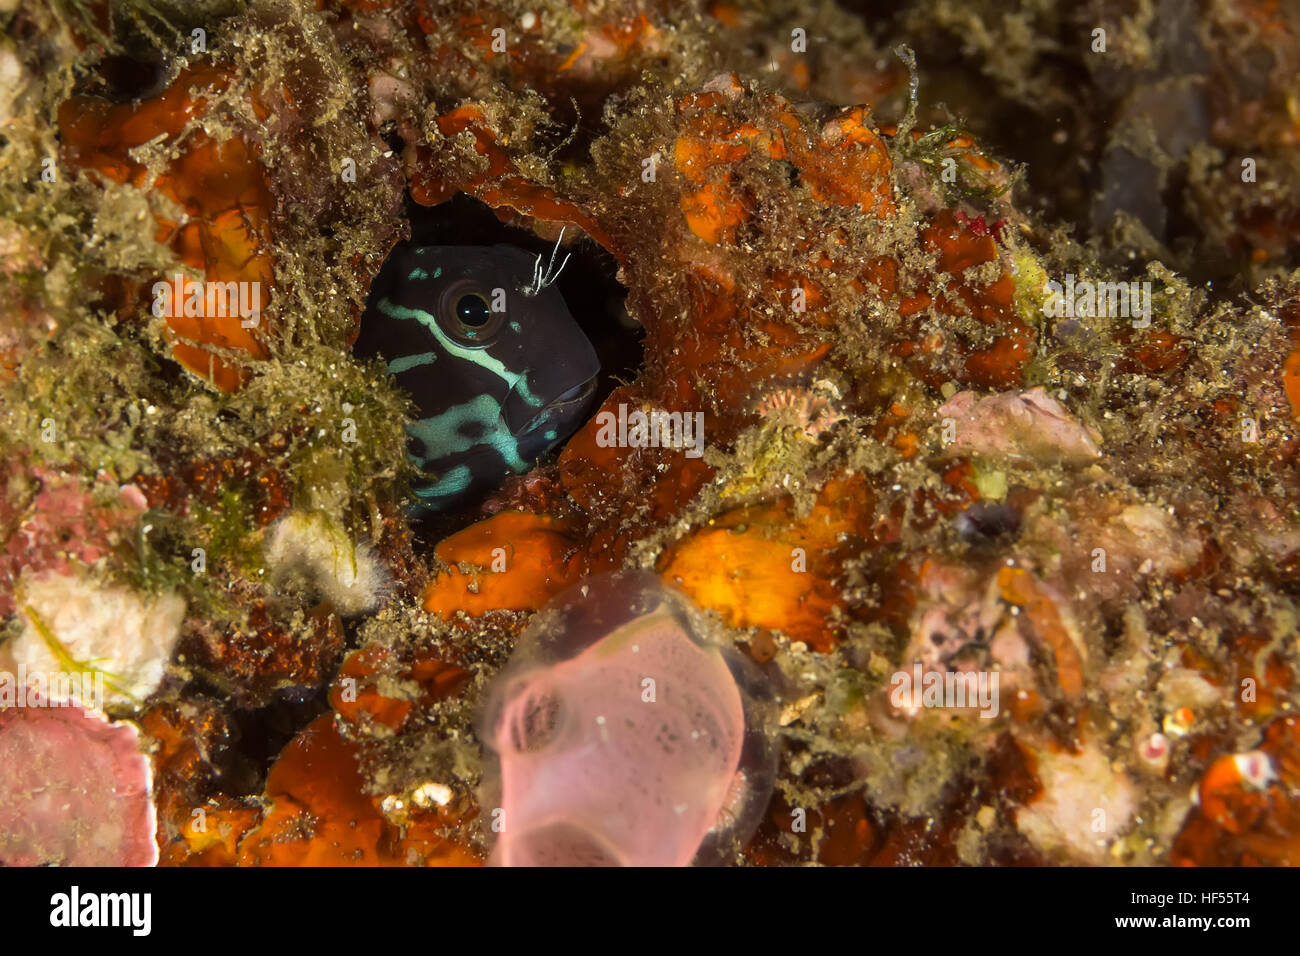 Underwater picture of Bicolor Blenny (Ecsenius bicolor) in the hidding place Stock Photo